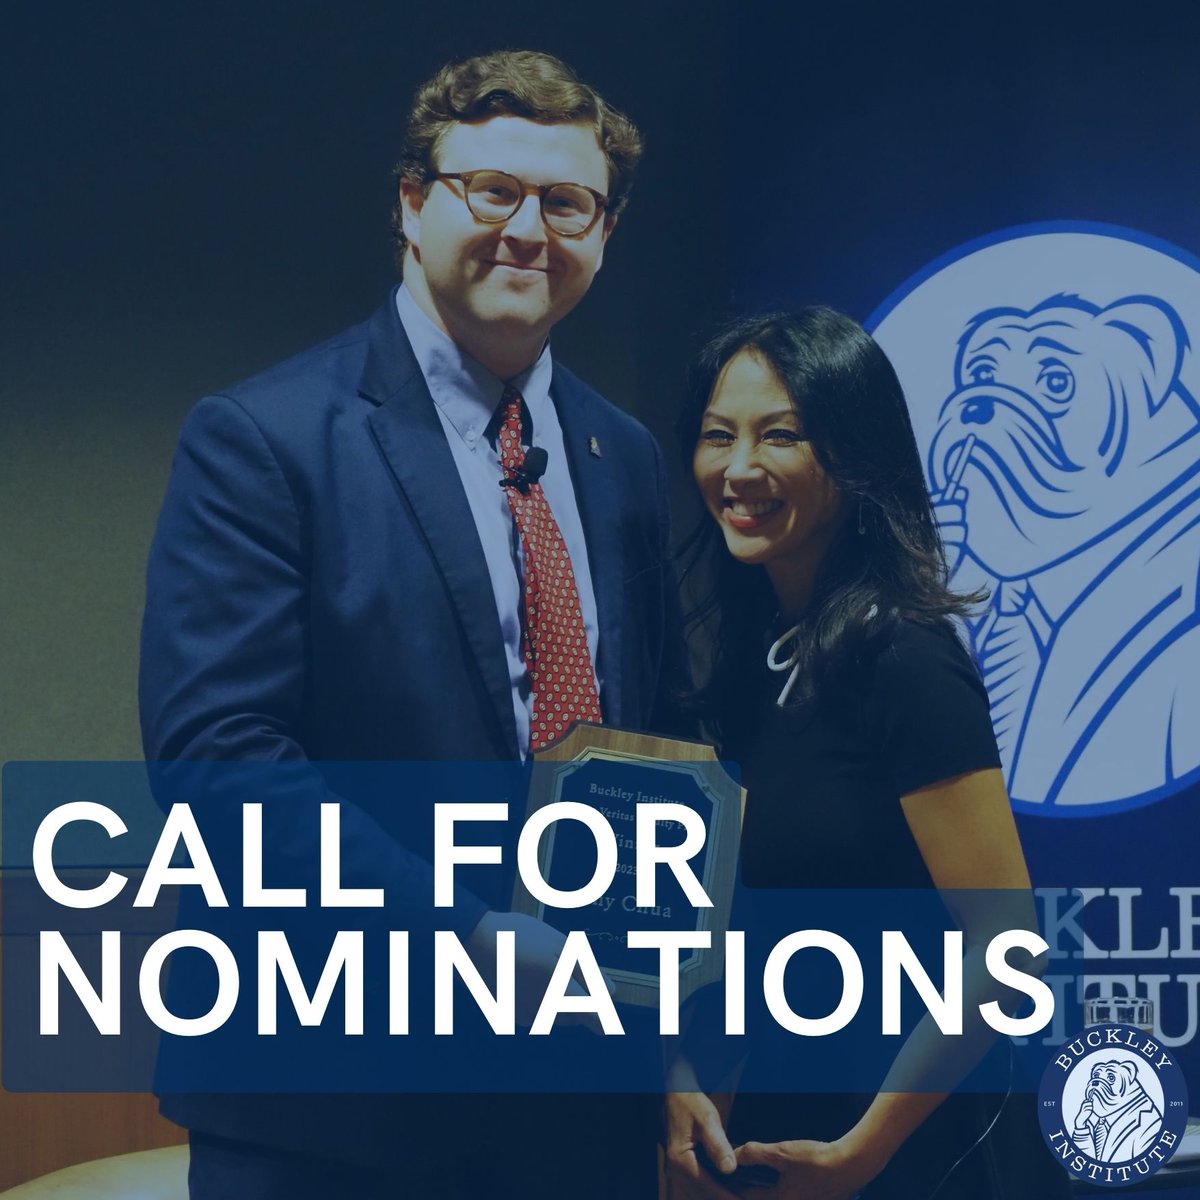 Does your professor go above and beyond to support open dialogue in the classroom? They could win $10,000. Past winners include @amychua and Mordechai Levy-Eichel. Nominate a Yale faculty member for this year’s Lux et Veritas Faculty Prize here: buckleyinstitute.com/programs/lux-e… @yale